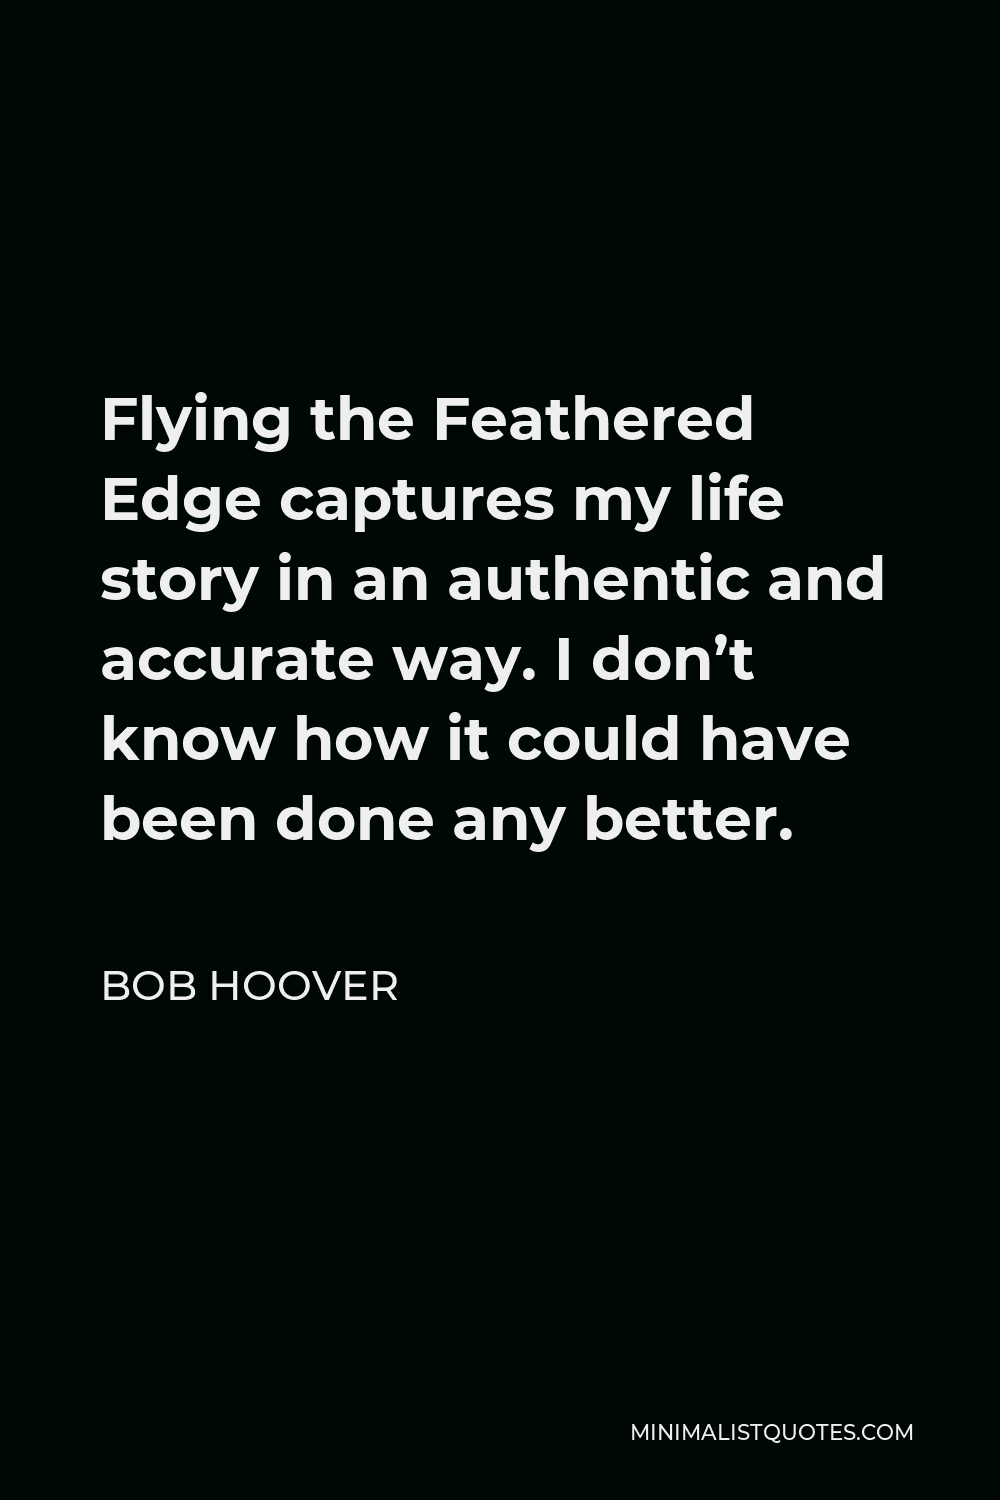 Bob Hoover Quote - Flying the Feathered Edge captures my life story in an authentic and accurate way. I don’t know how it could have been done any better.